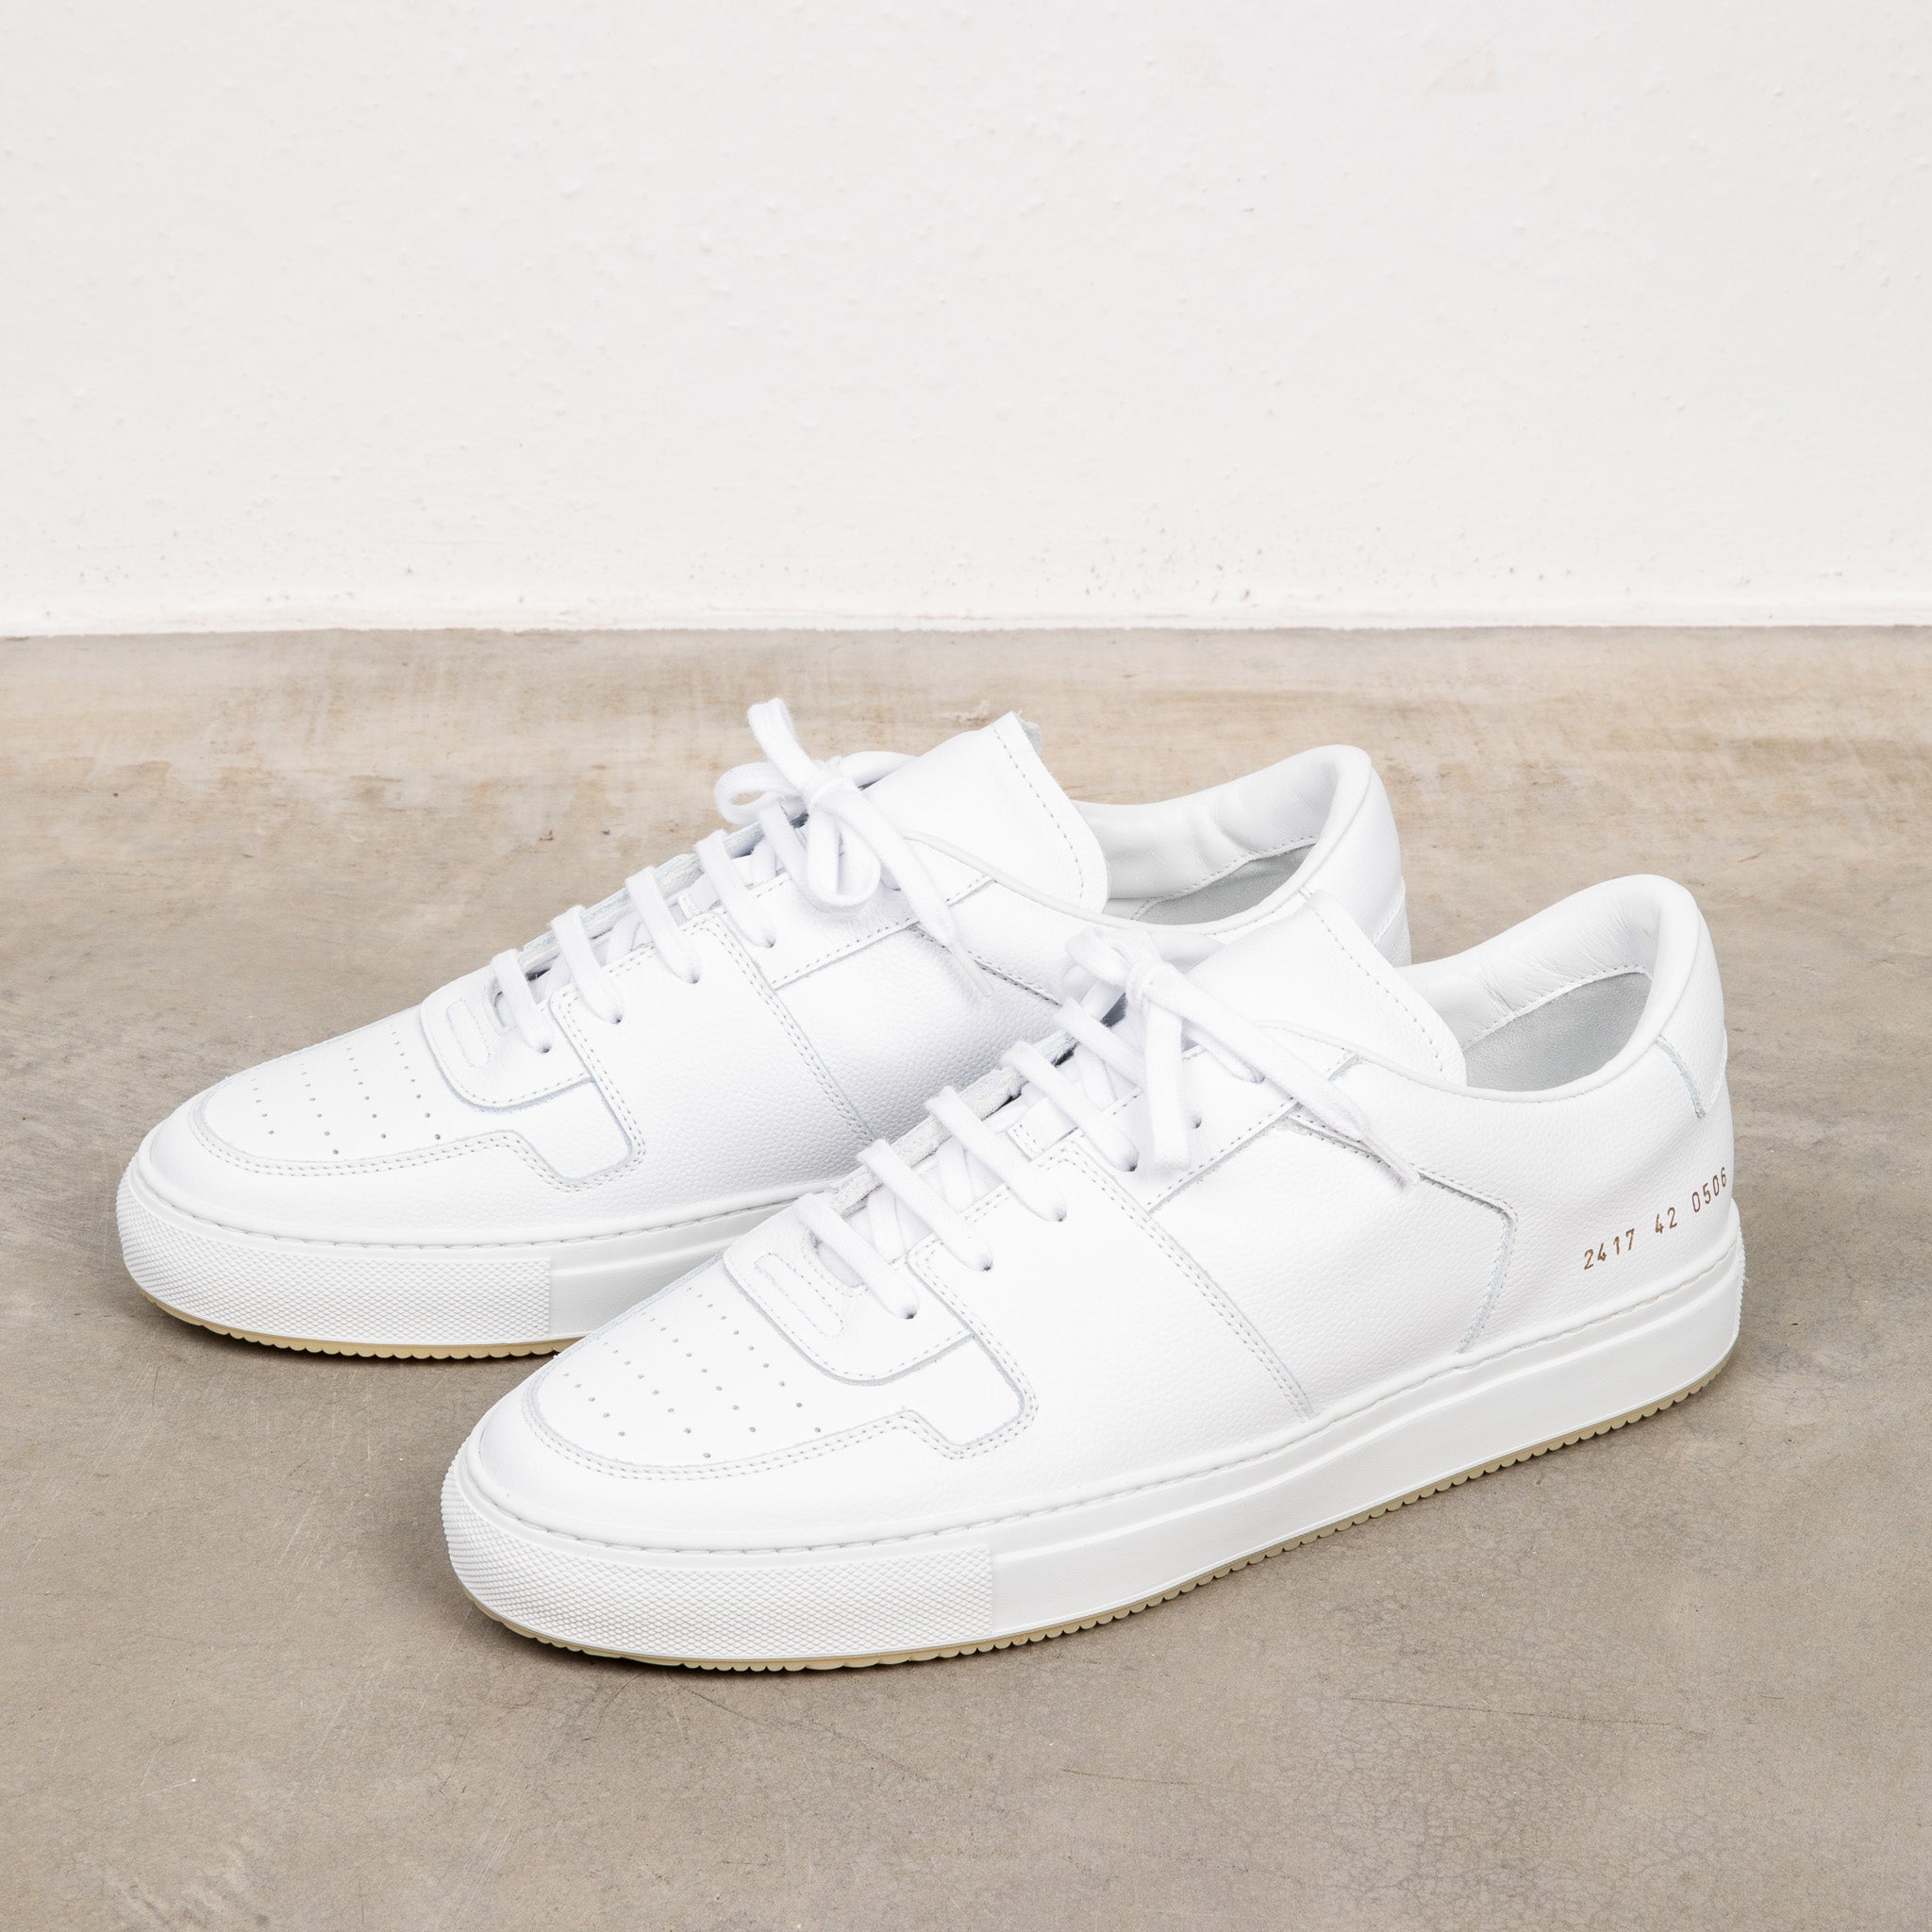 Common Projects Decades White